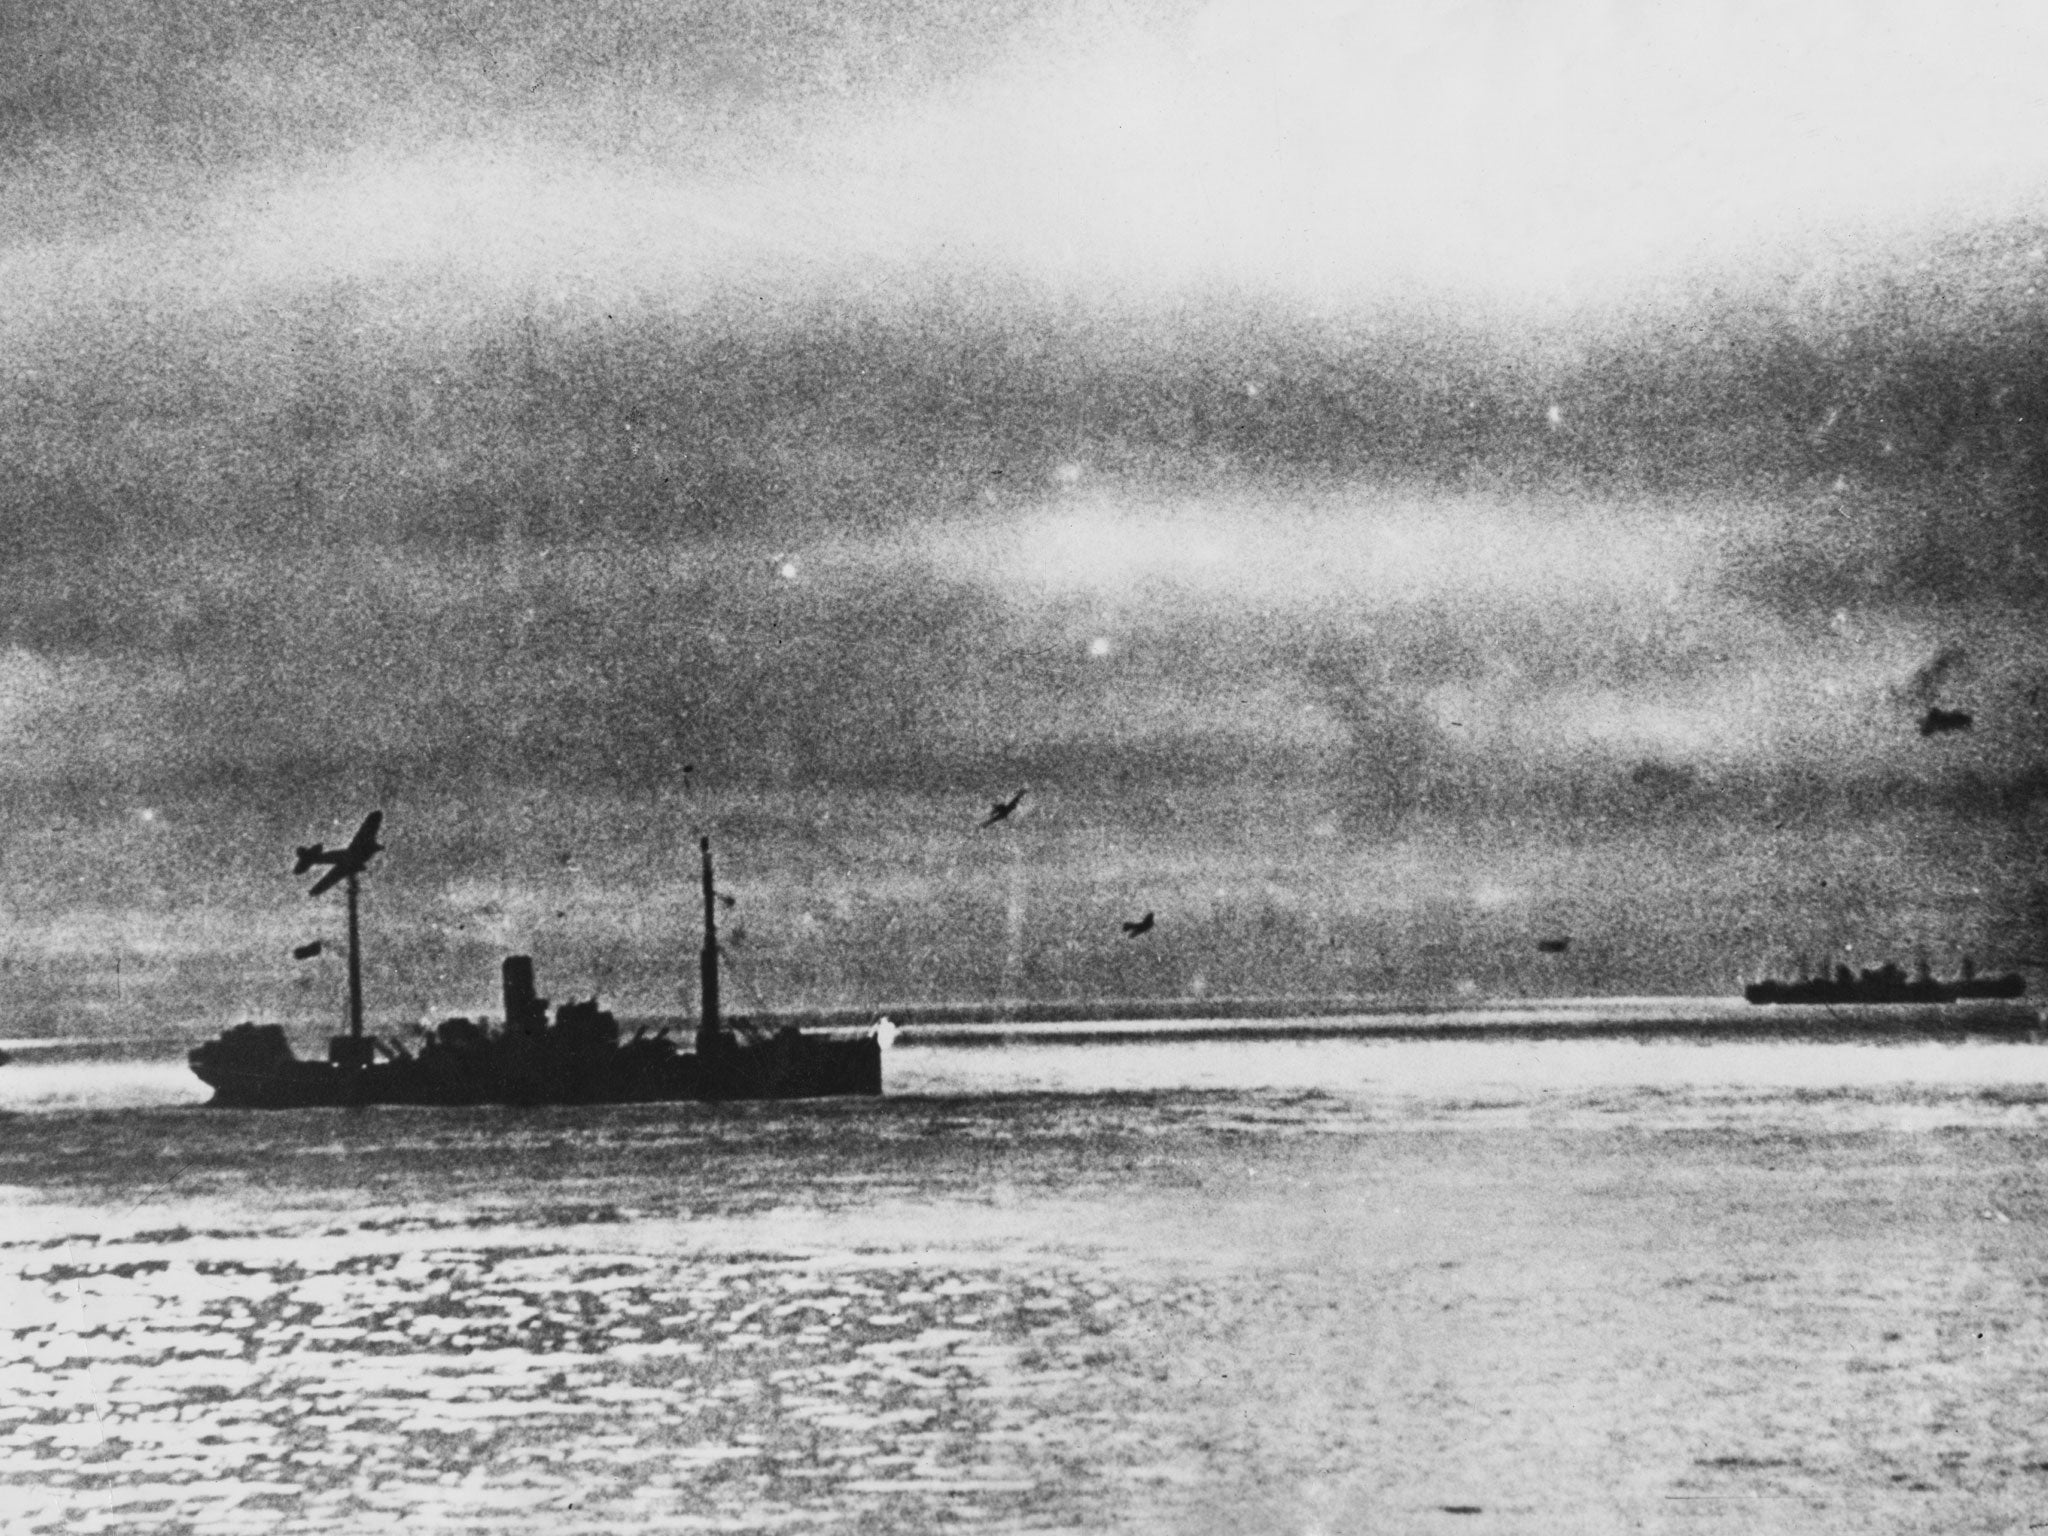 Allied World War II convoy PQ 17 is attacked by German torpedo aircraft on its way across the Arctic Ocean from Hvalfjord in Iceland to Arkhangelsk in the Soviet Union, in July 1942